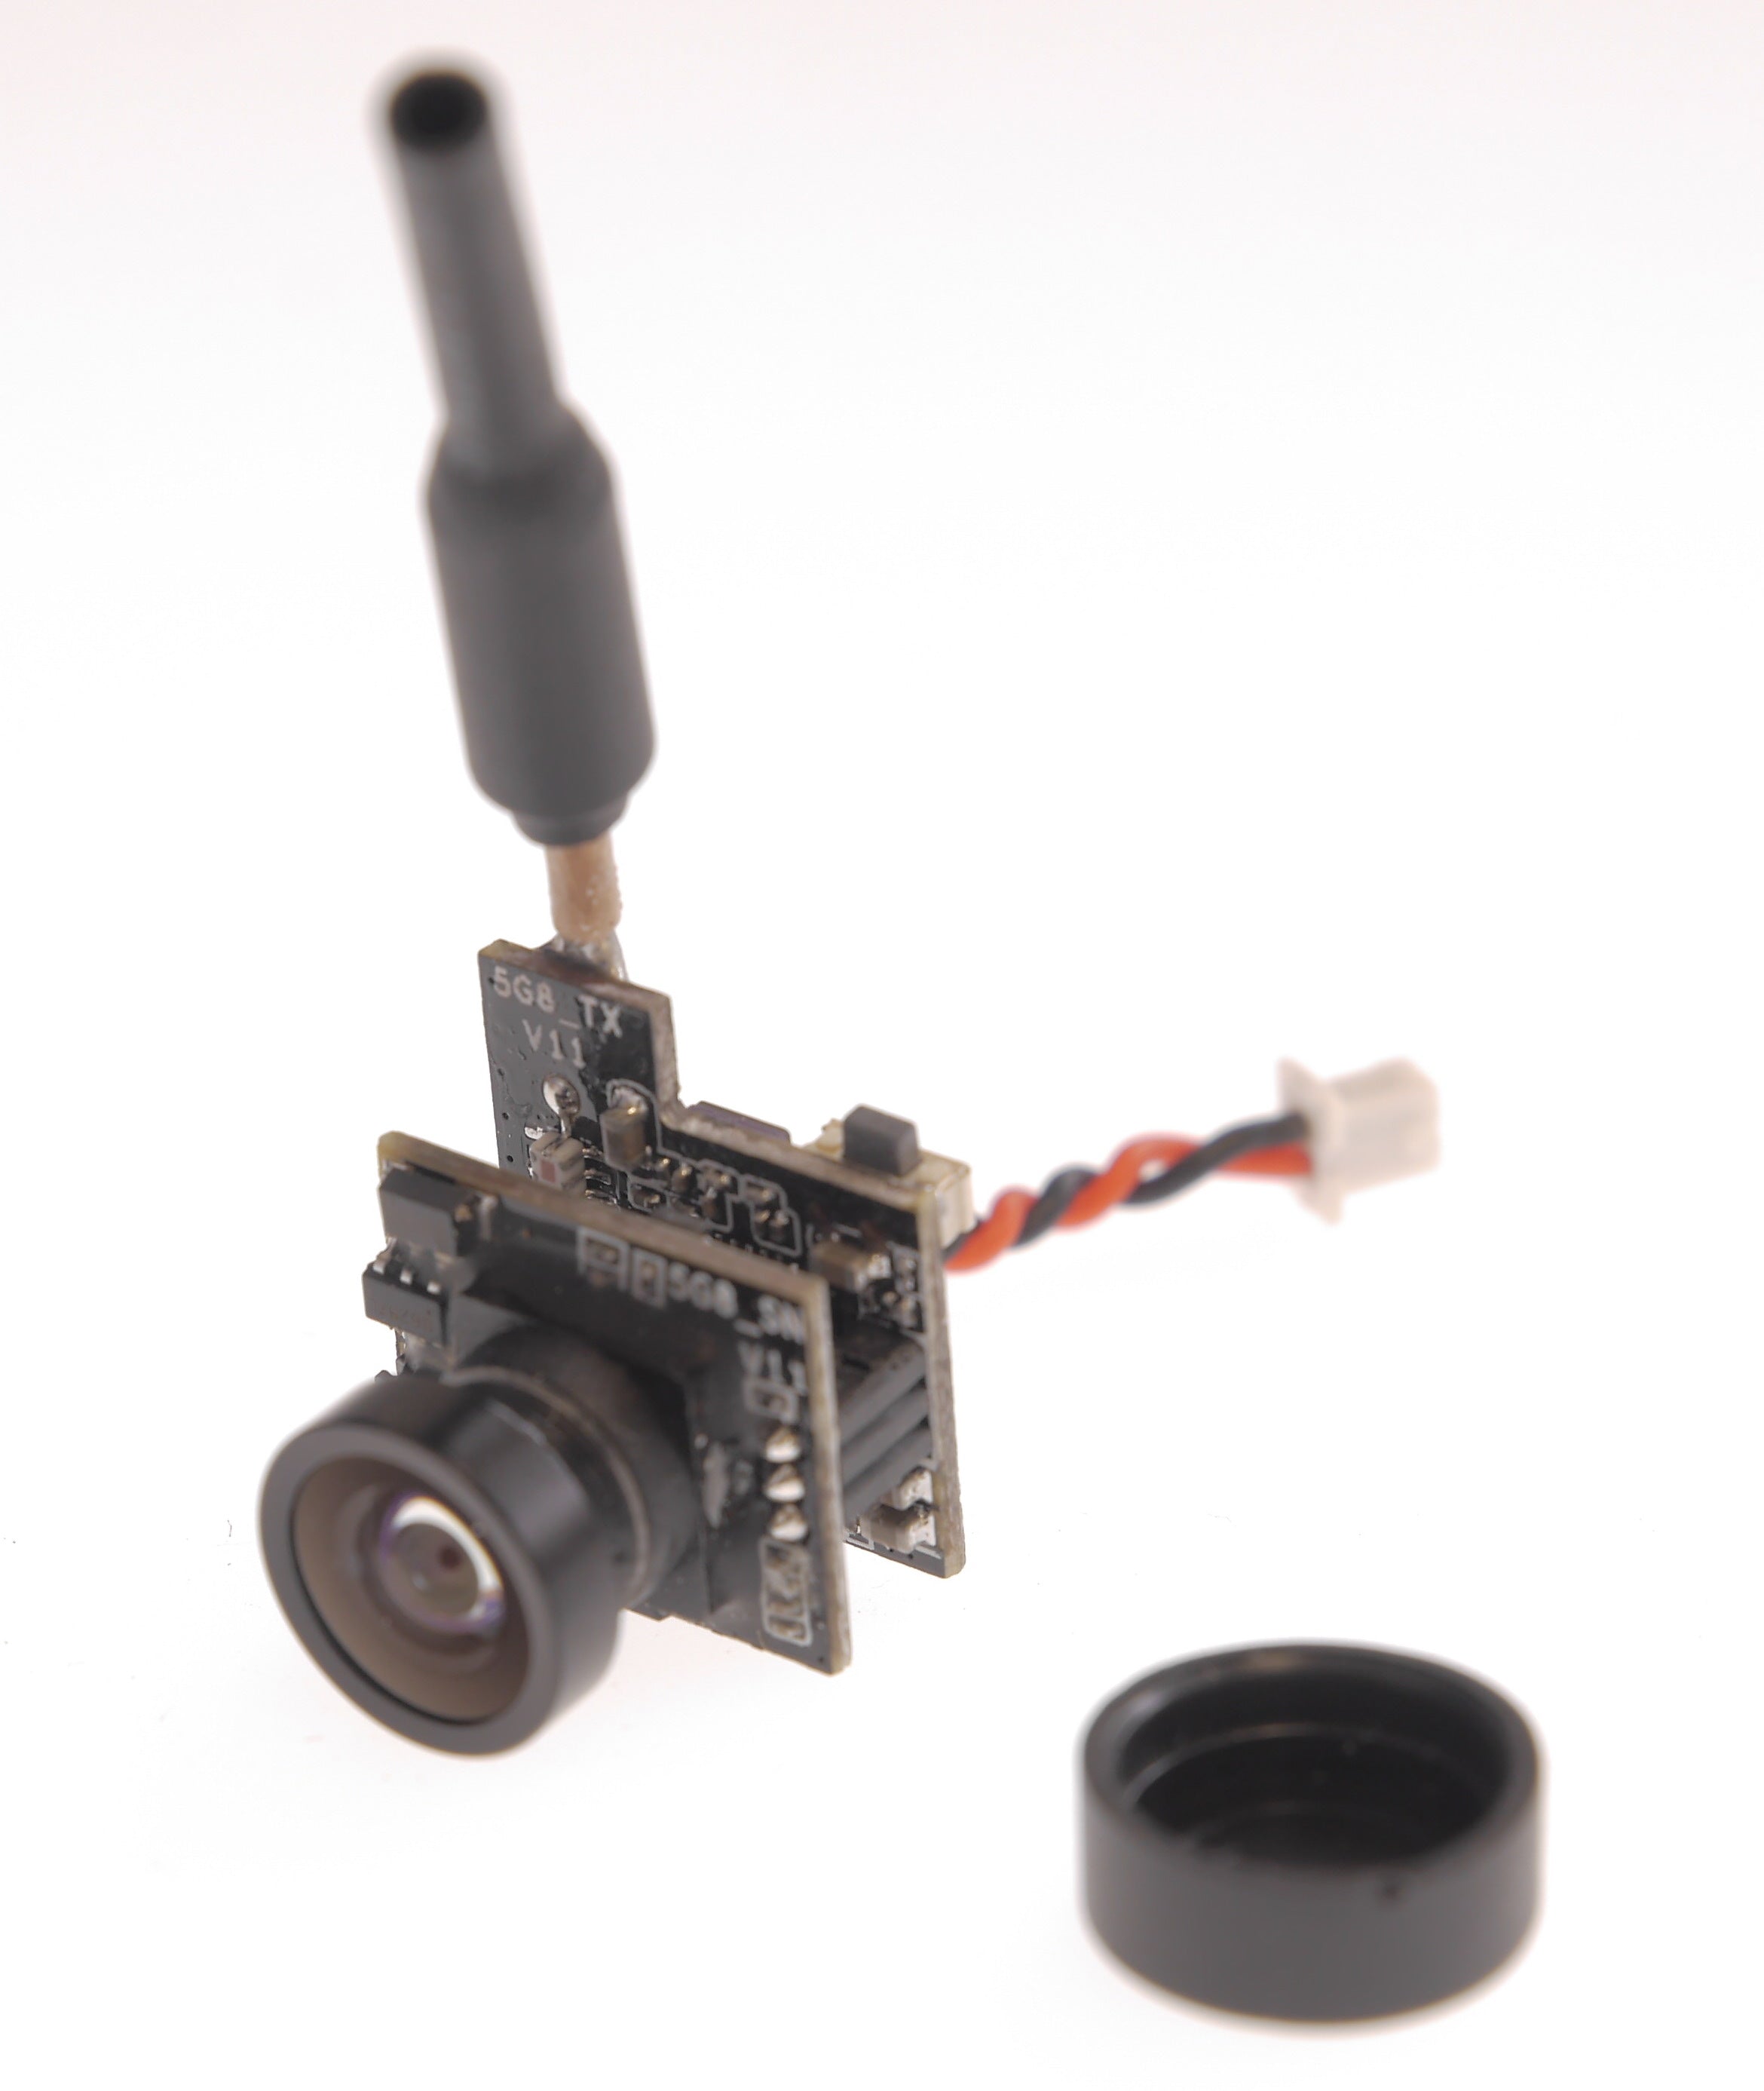 Micro FPV camera with transmitter (analog video)